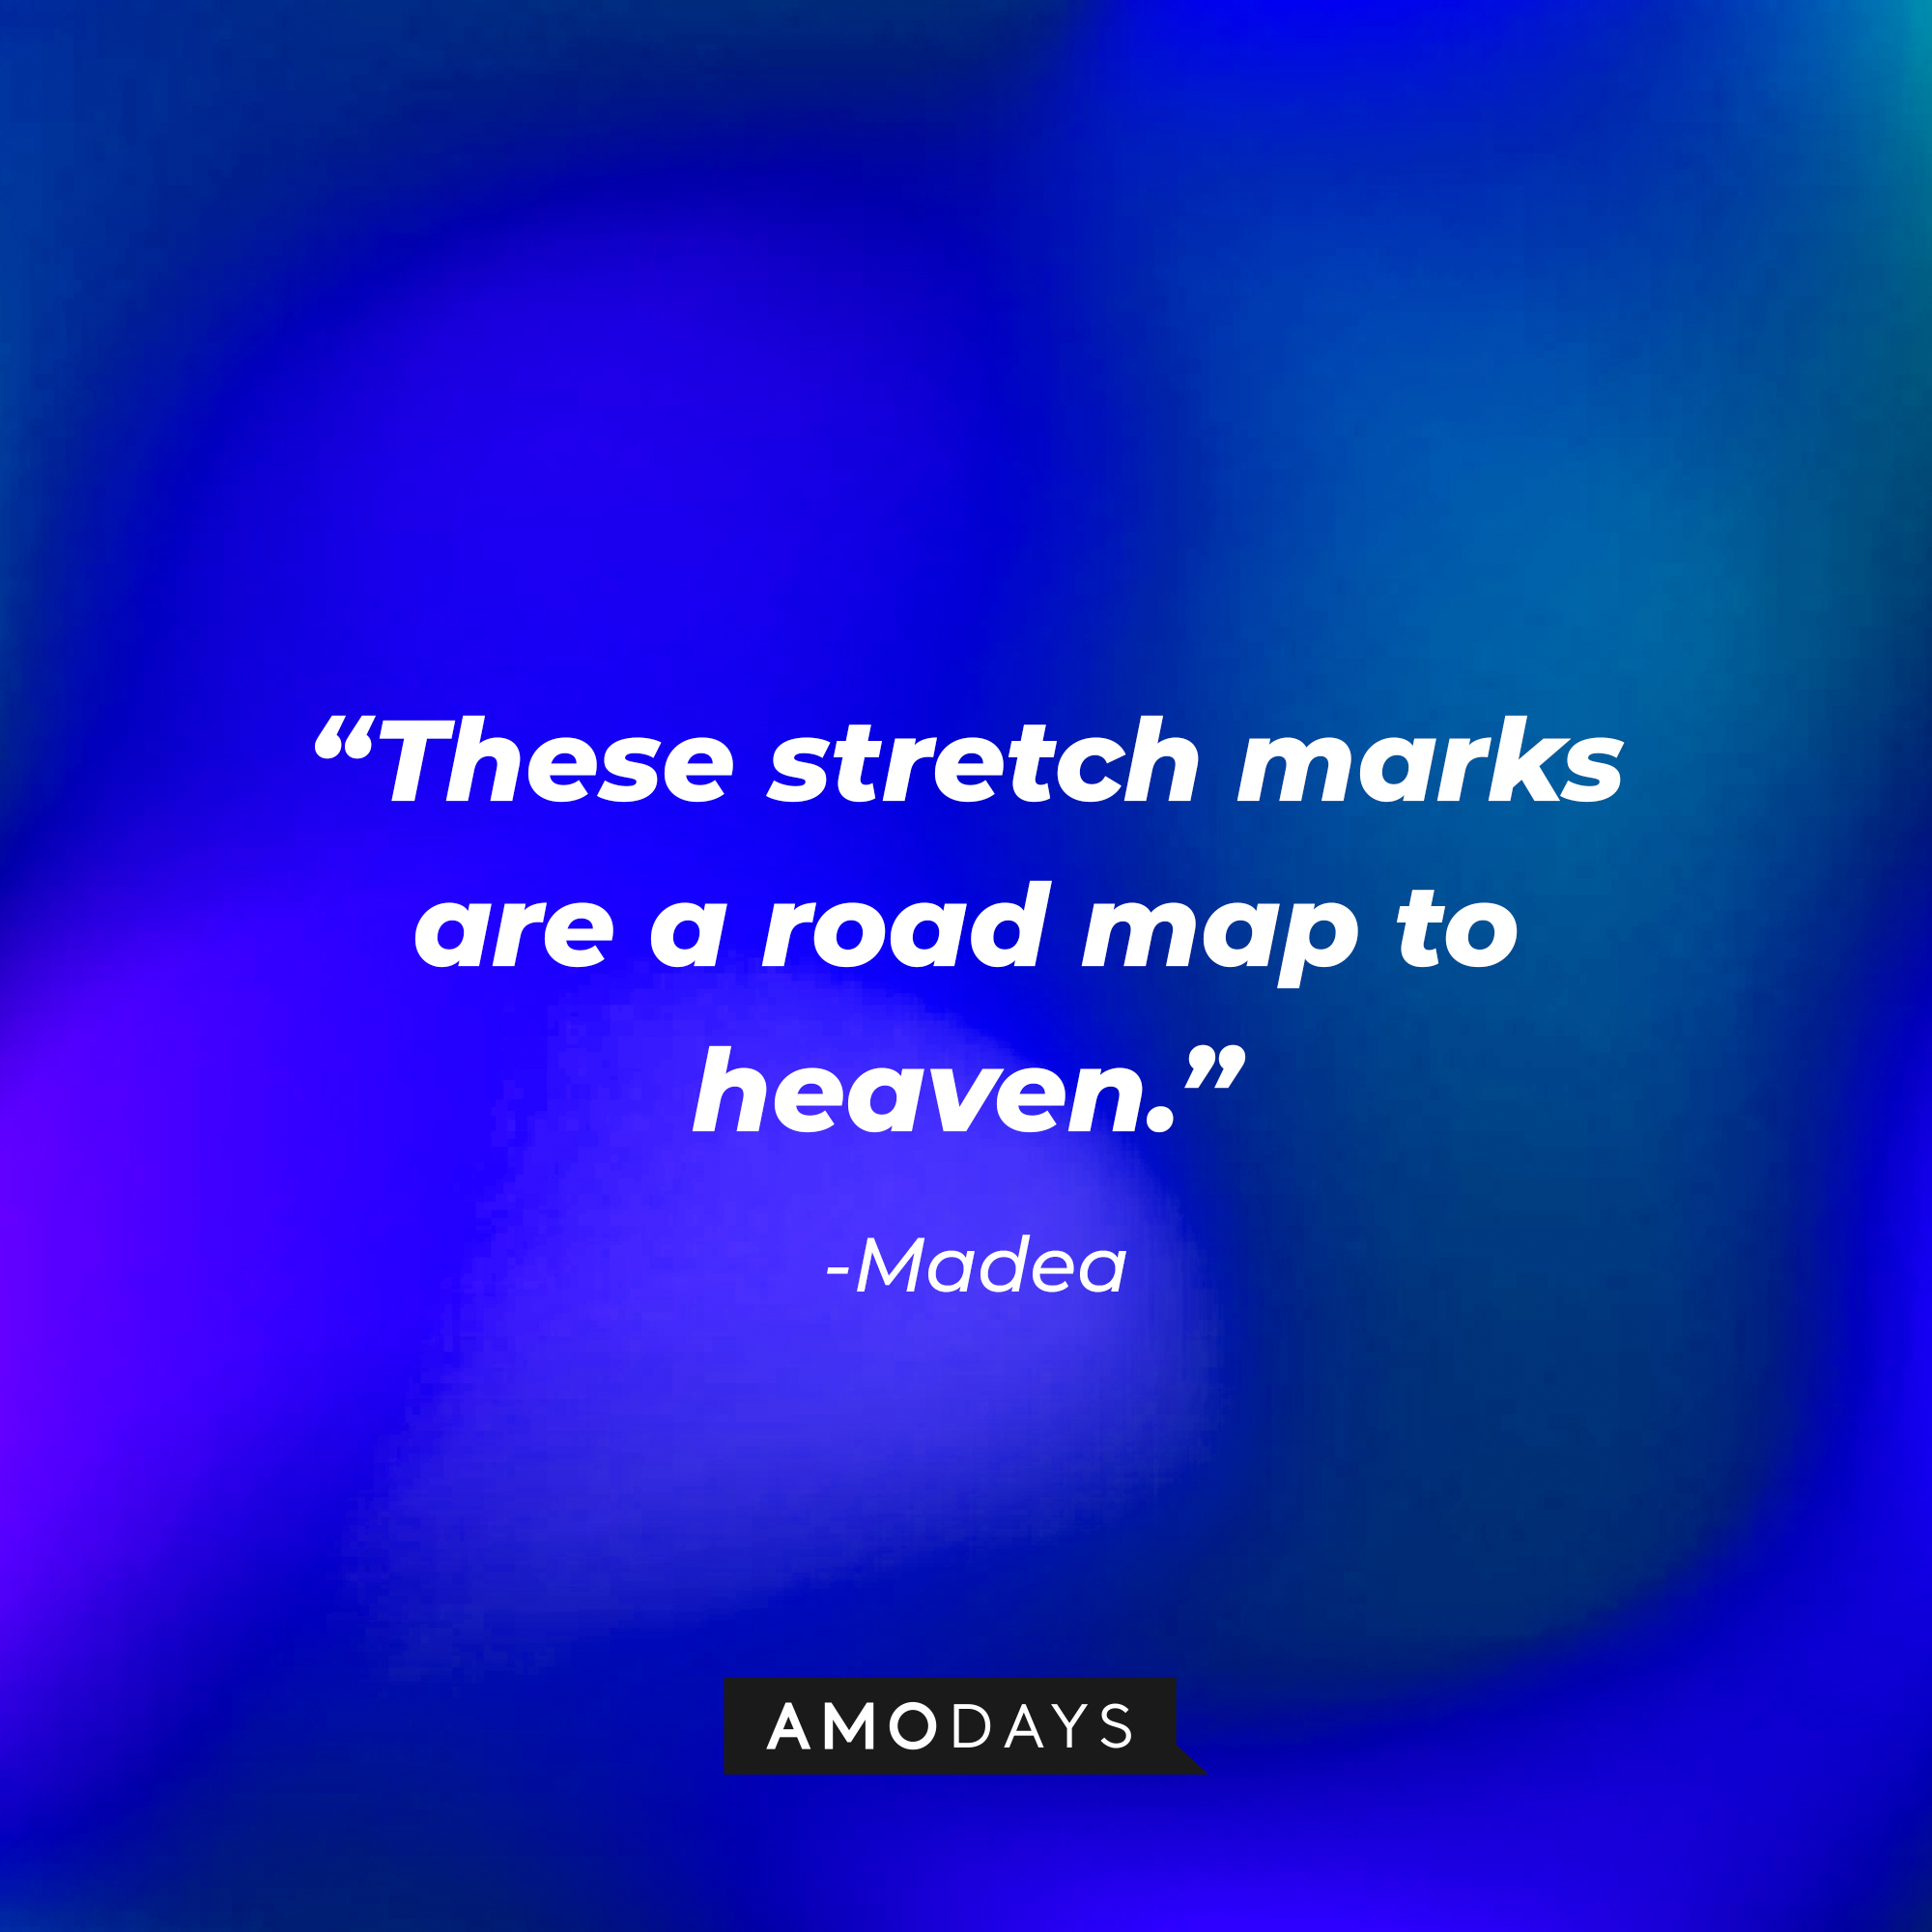 Madea’s quote: “These stretch marks are a road map to heaven.” | Source: AmoDays